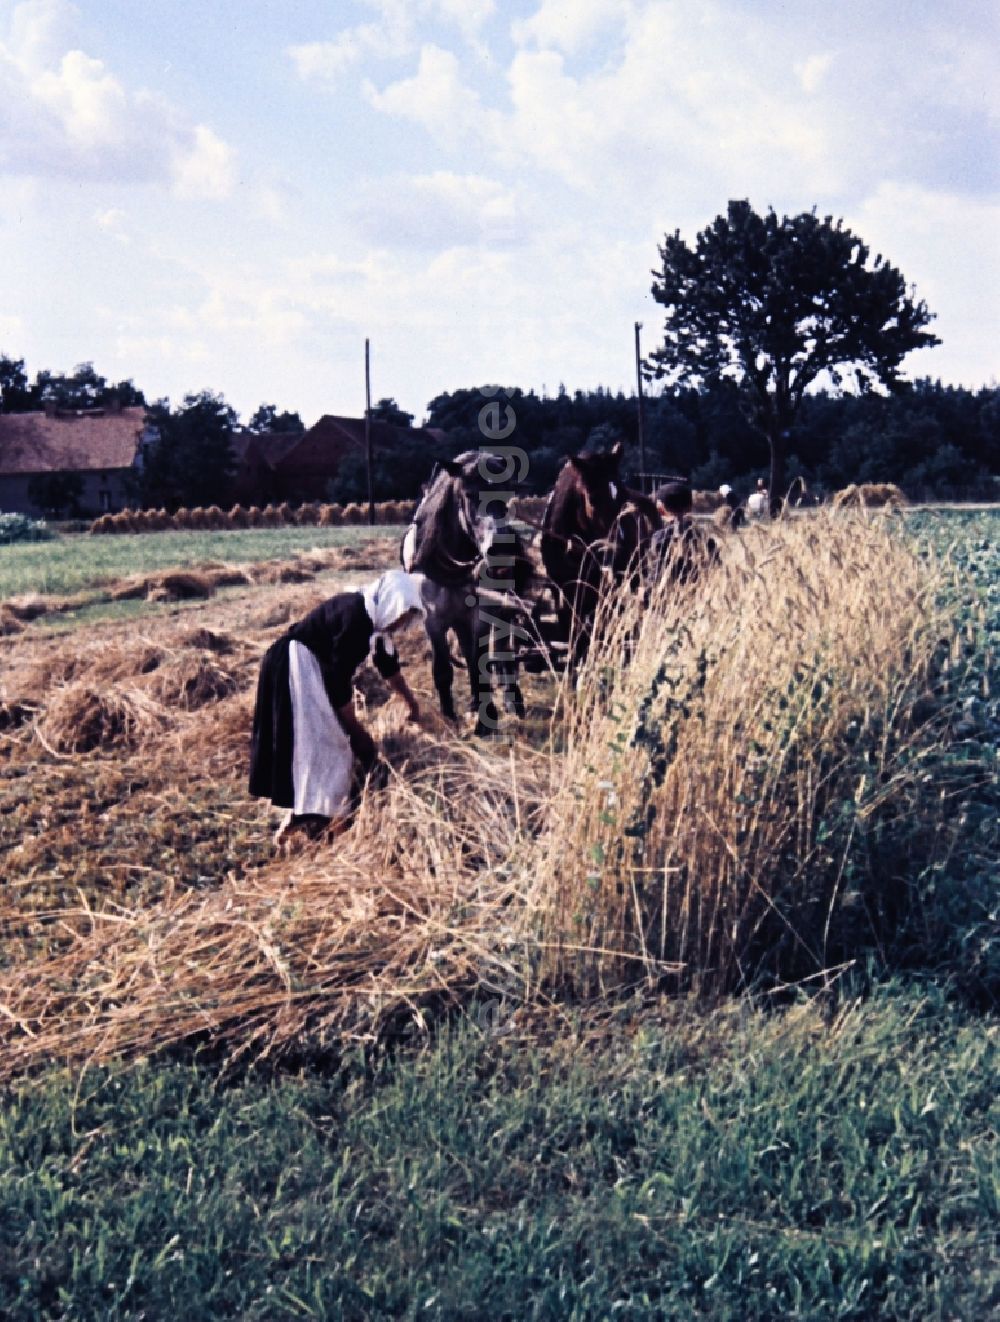 GDR photo archive: Teicha - Farmers harvesting grain and sheaf laying on a harvested field in Teicha in the state Saxony on the territory of the former GDR, German Democratic Republic